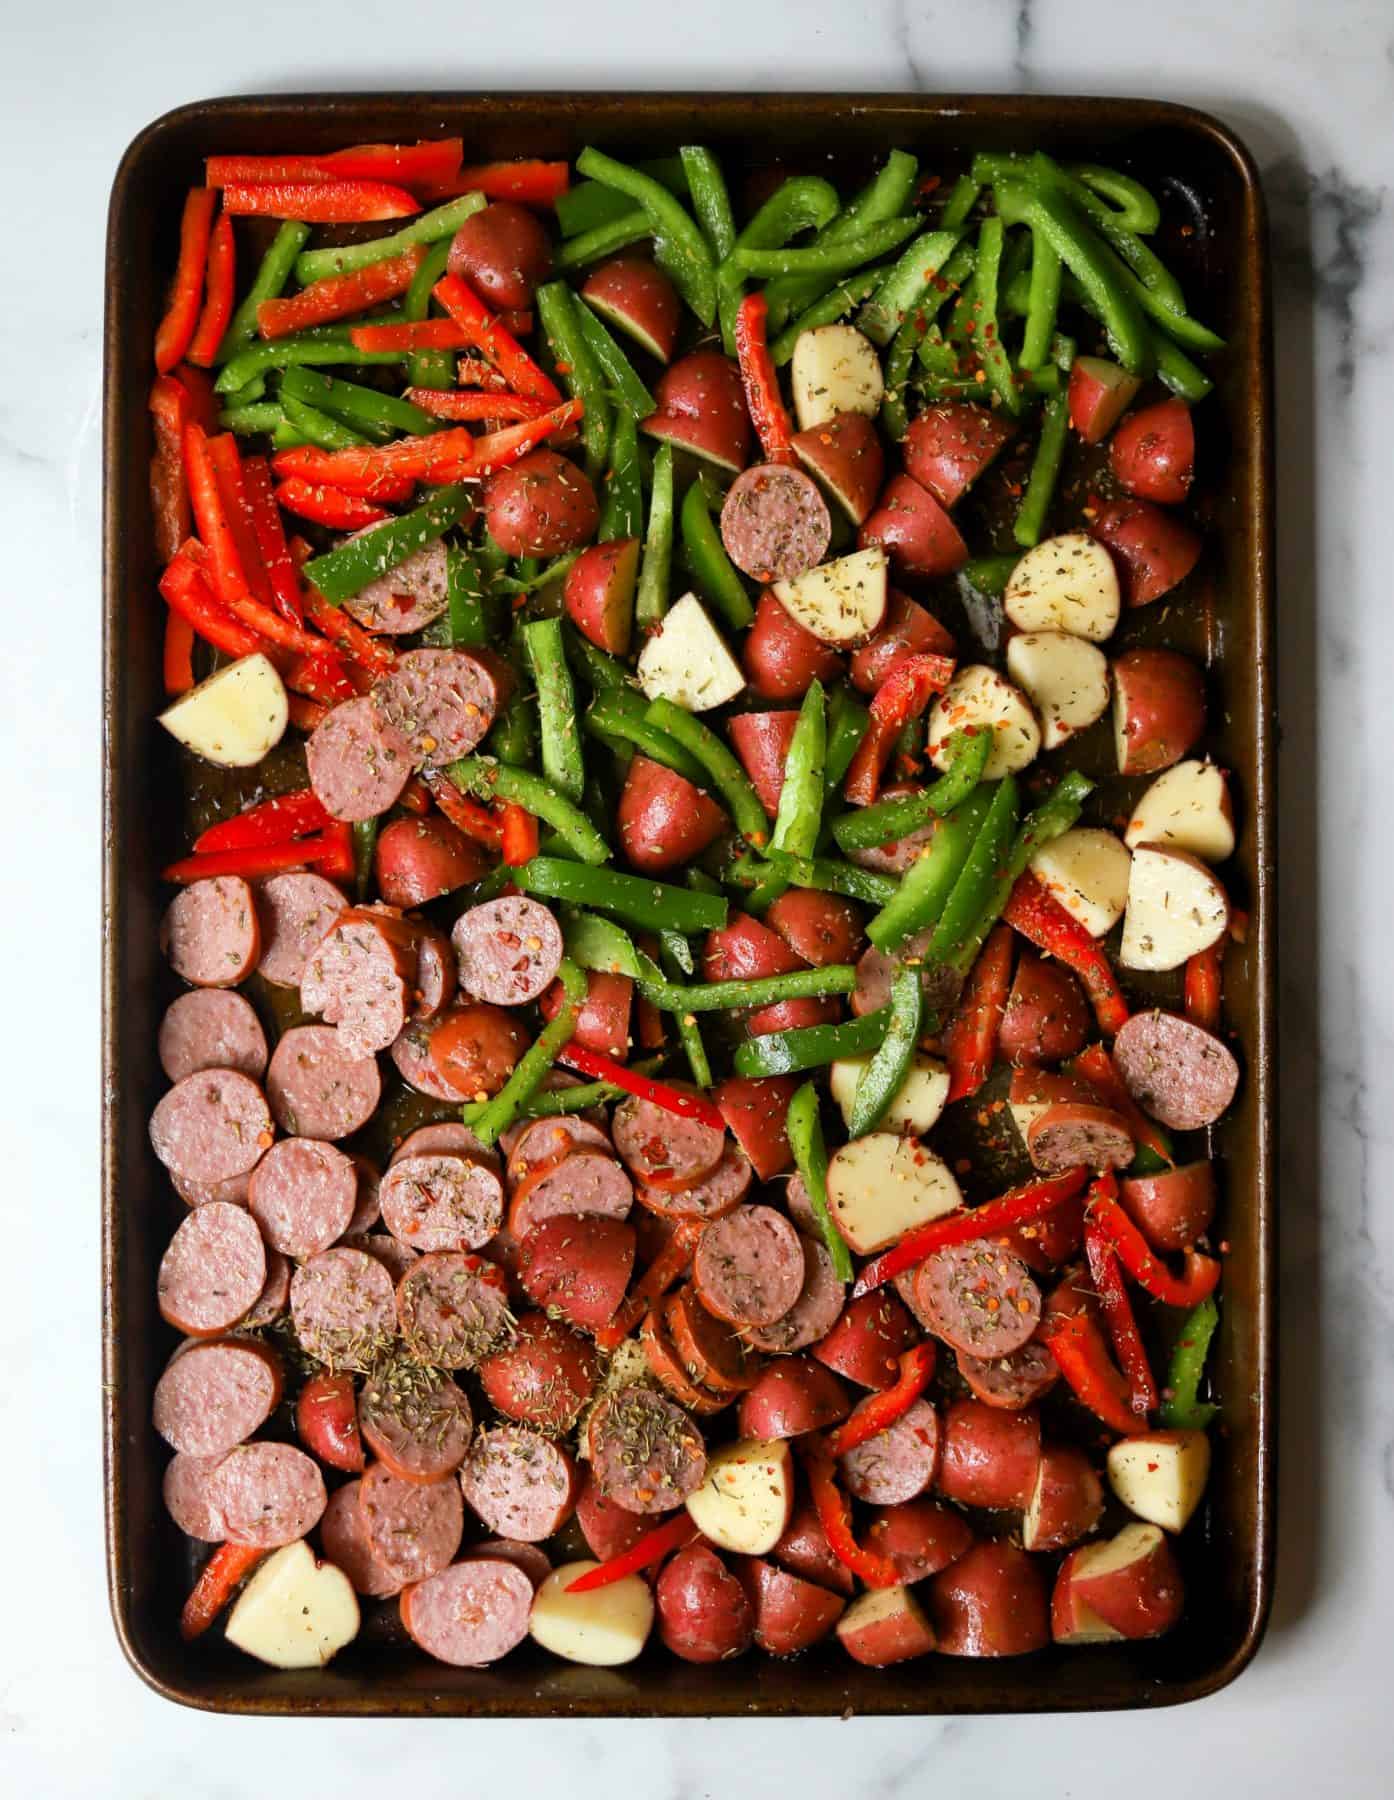 Sheet pan sausage, potatoes and bell peppers